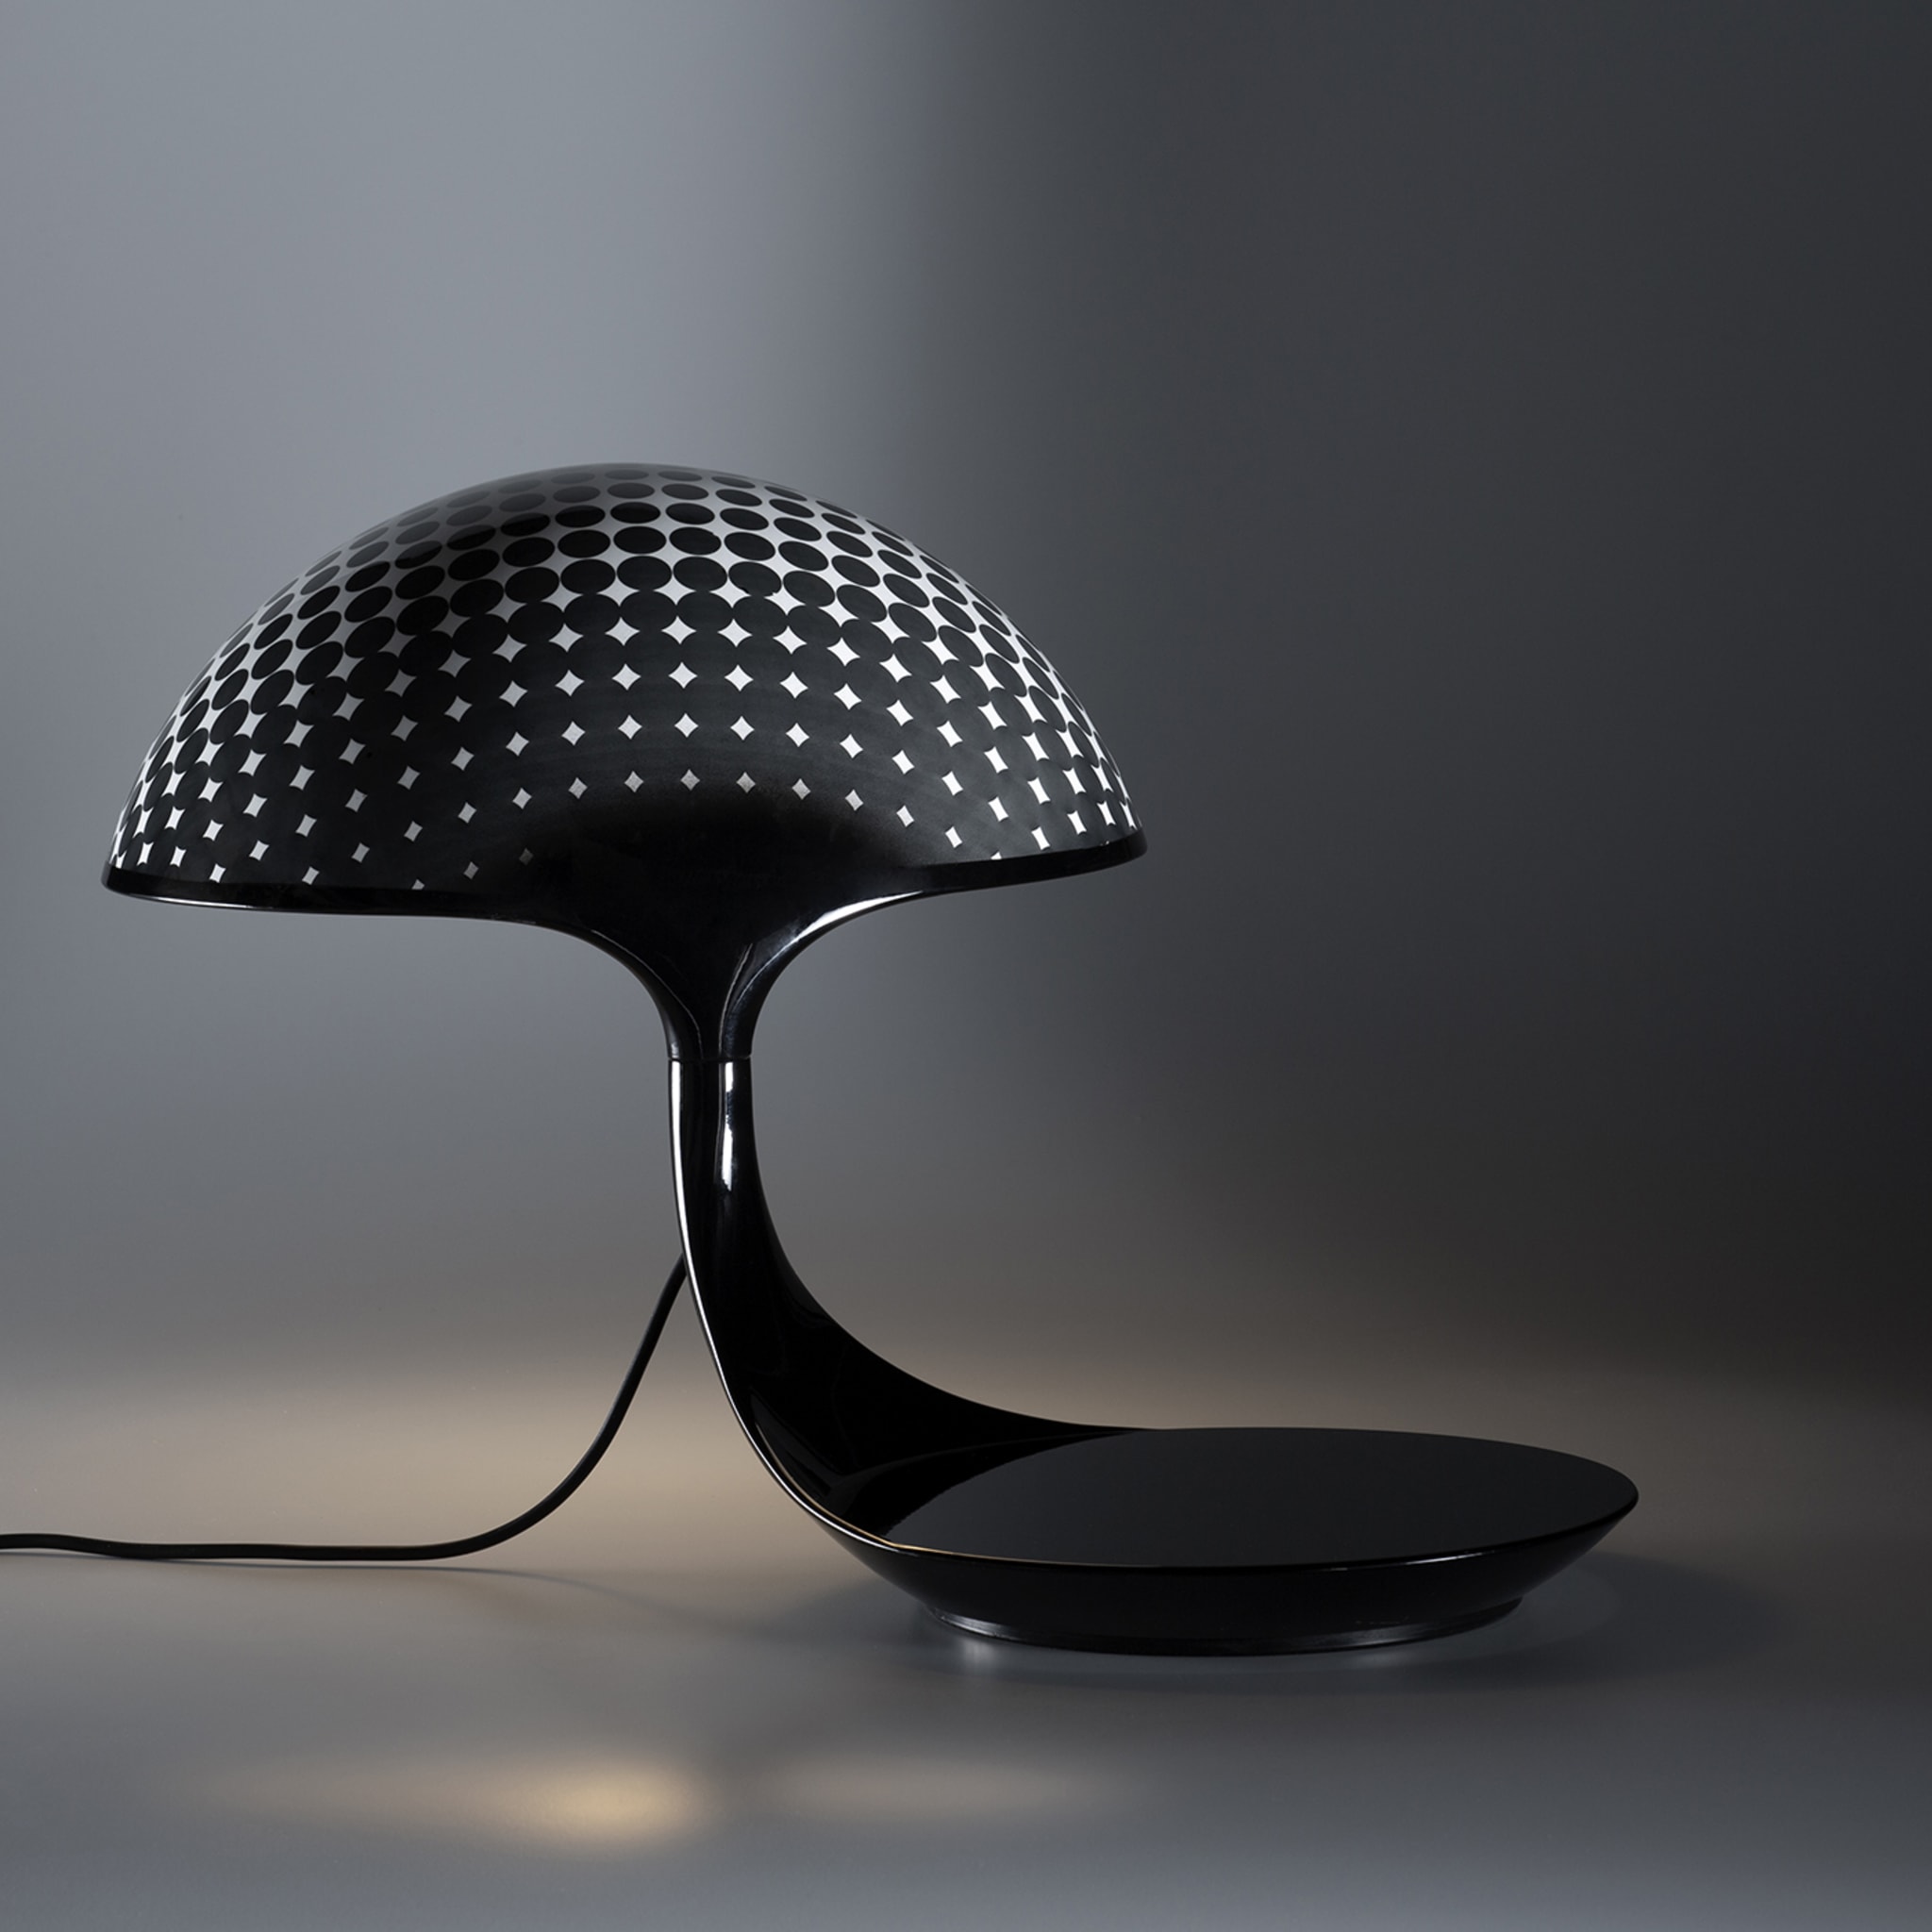 Cobra Texture Dotted Table Lamp by Brian Sironi - Alternative view 1